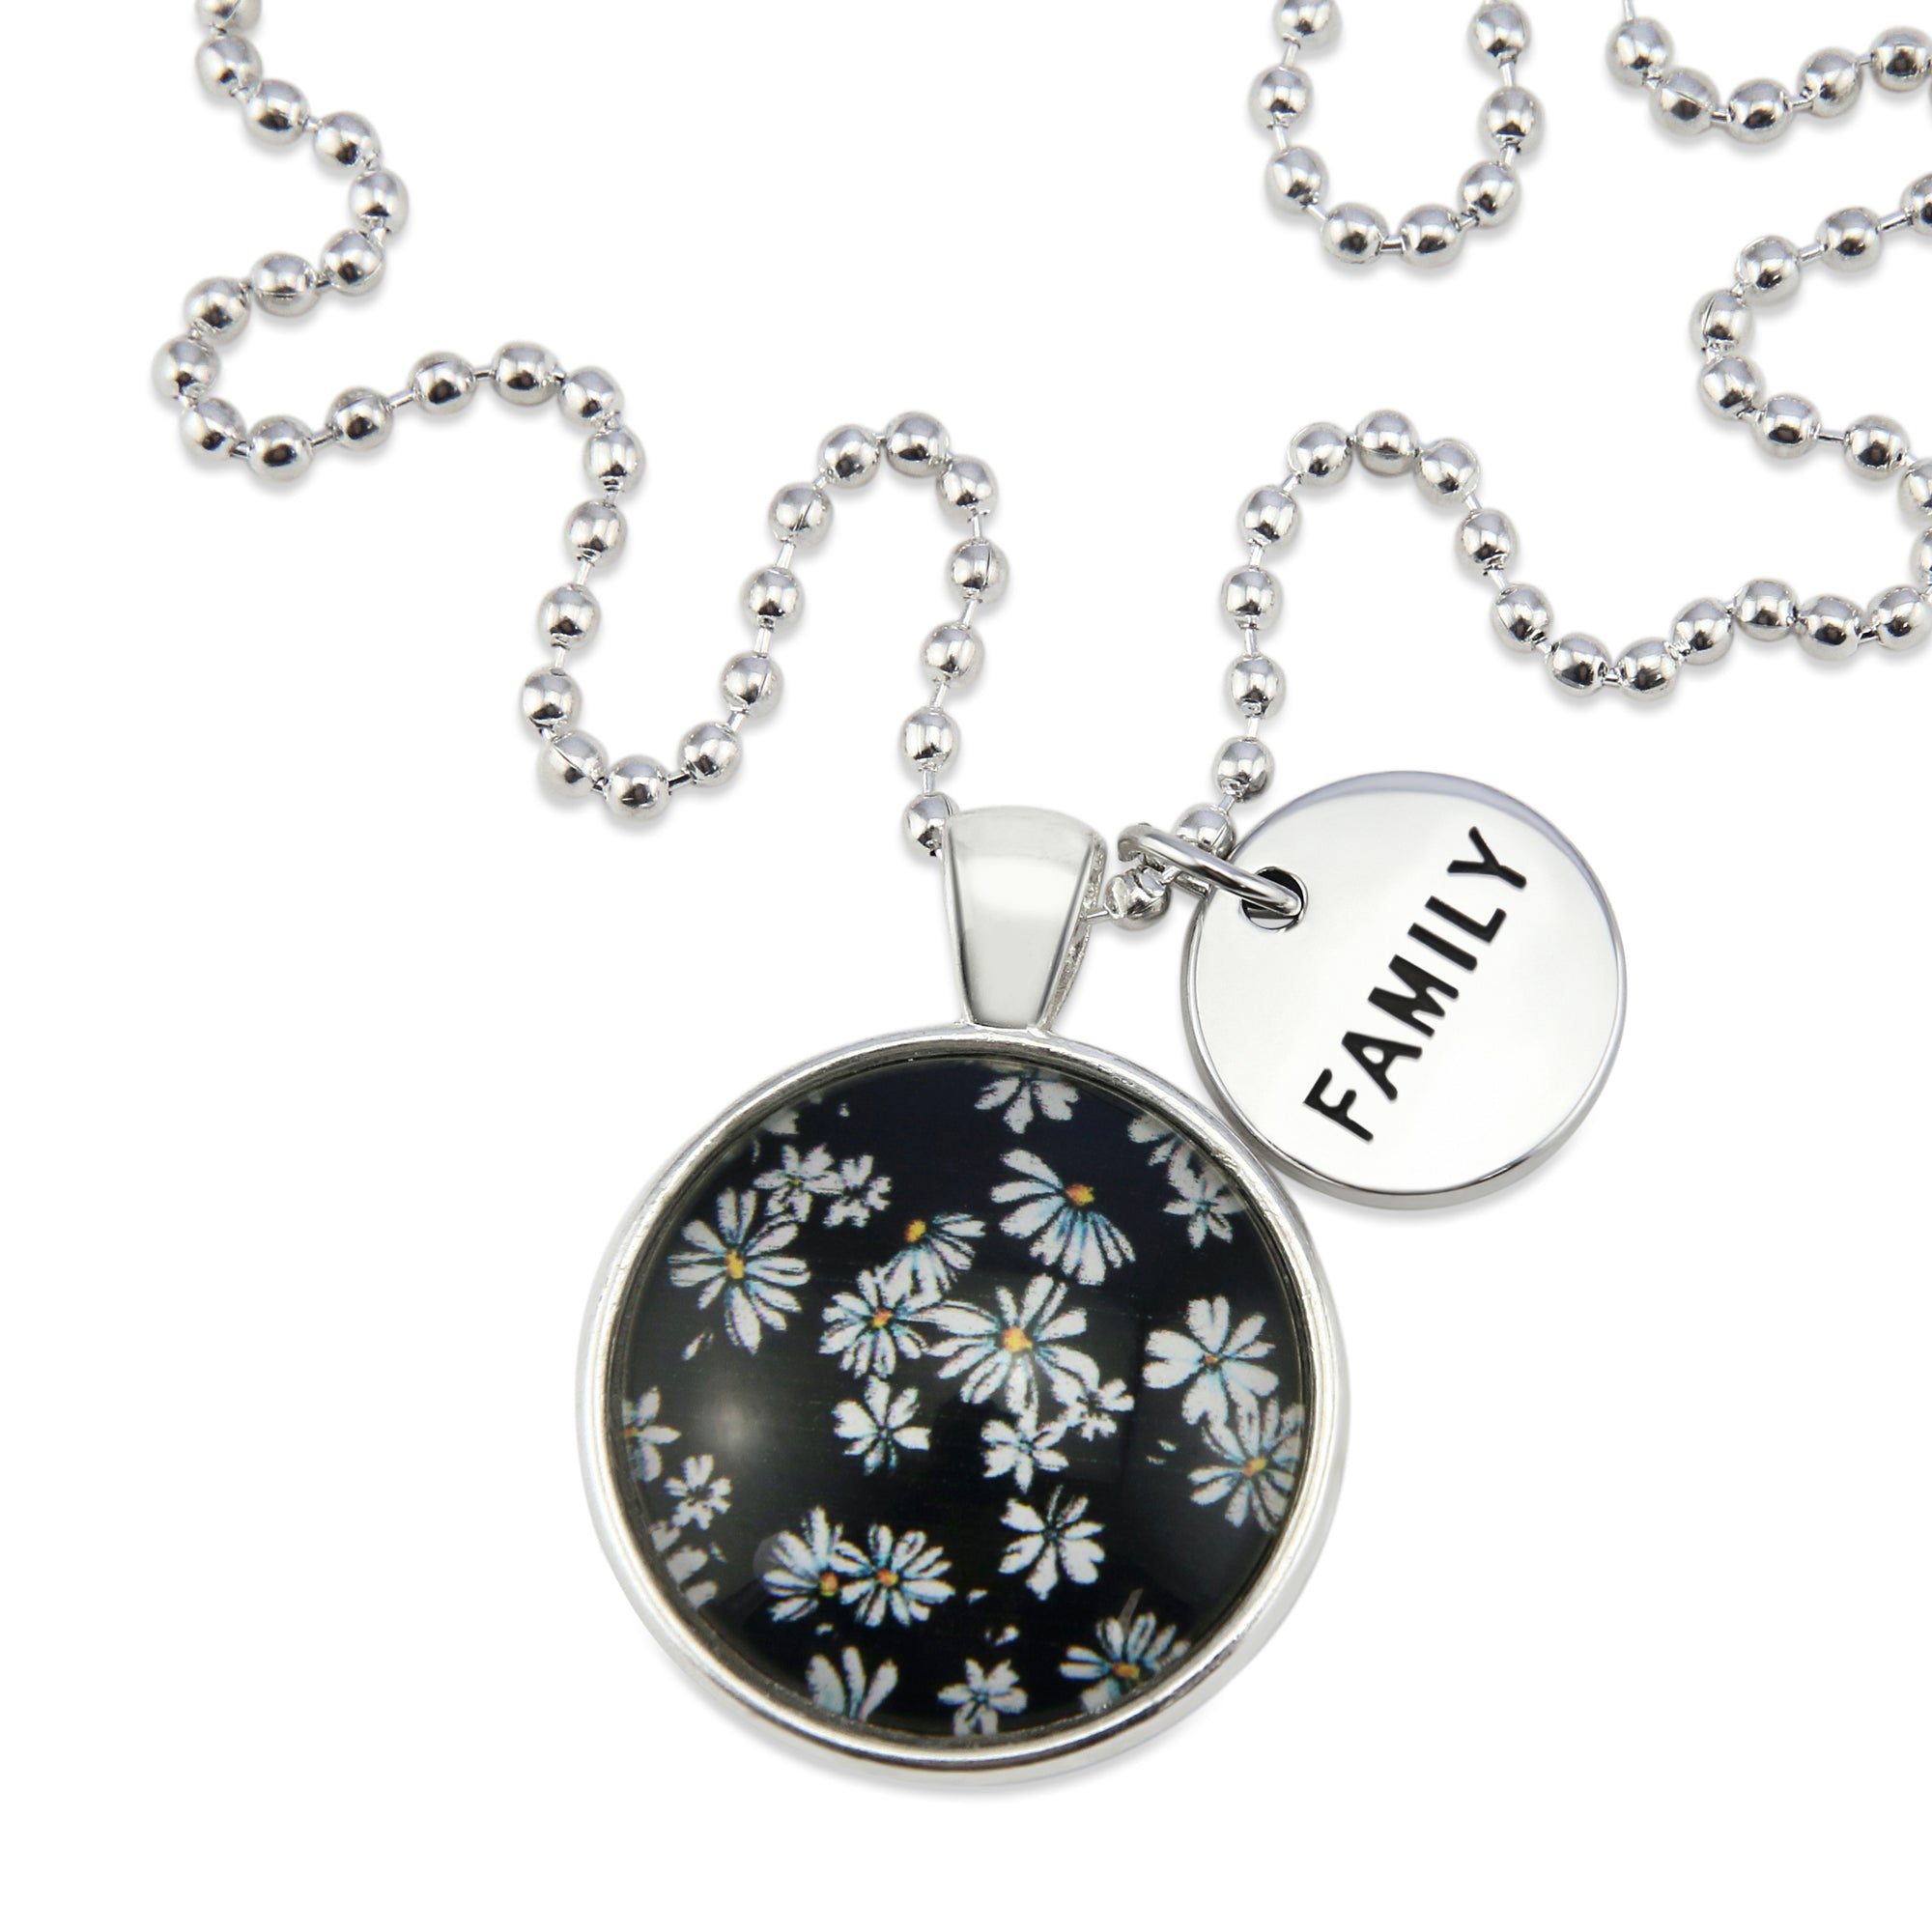 Black & White Collection - Bright Silver 'FAMILY' Necklace - Daisy Town (11033)